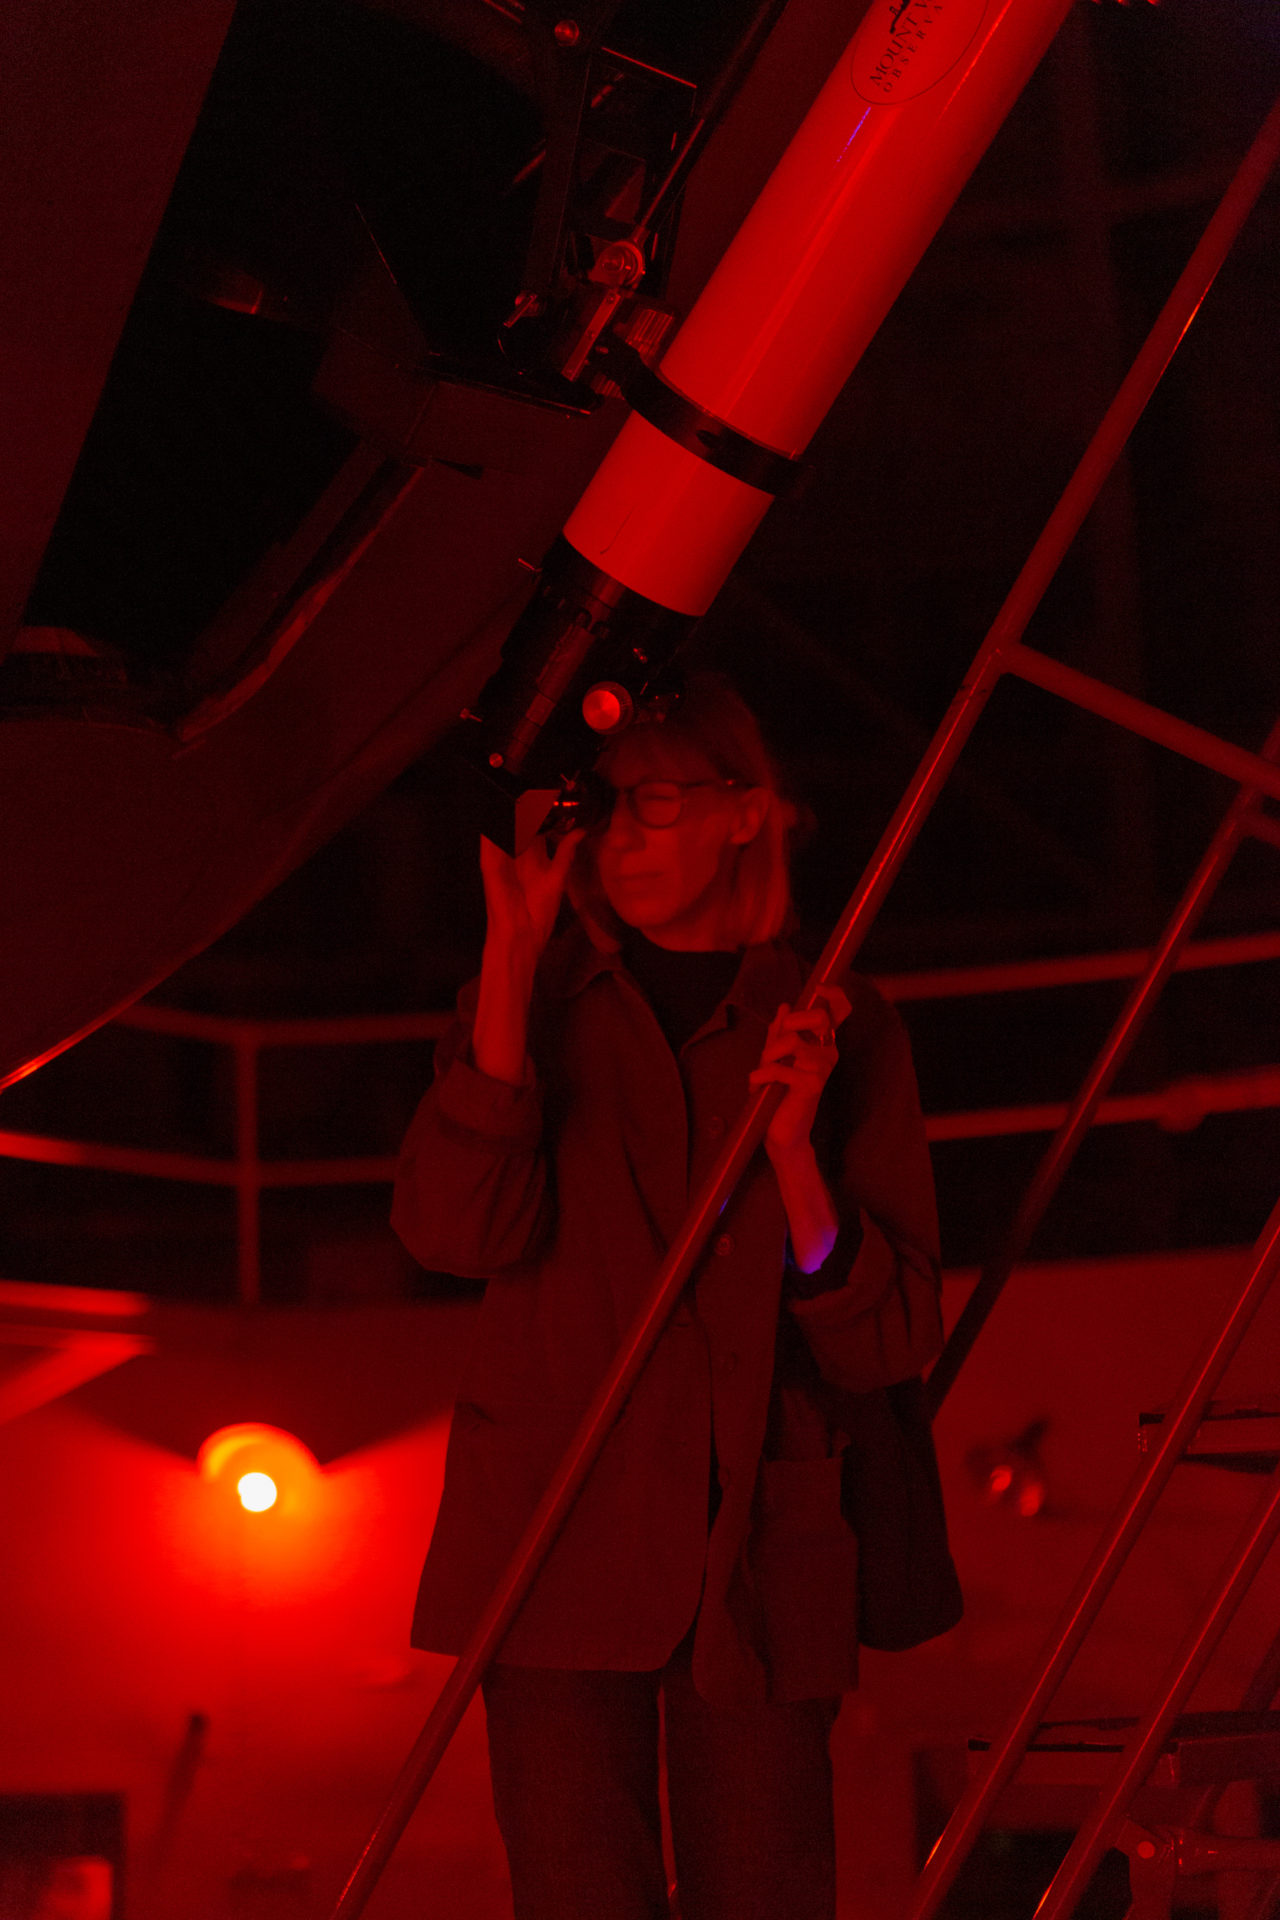 Telescope viewing, photo by Ian Byers-Gamber, courtesy of Fulcrum Arts